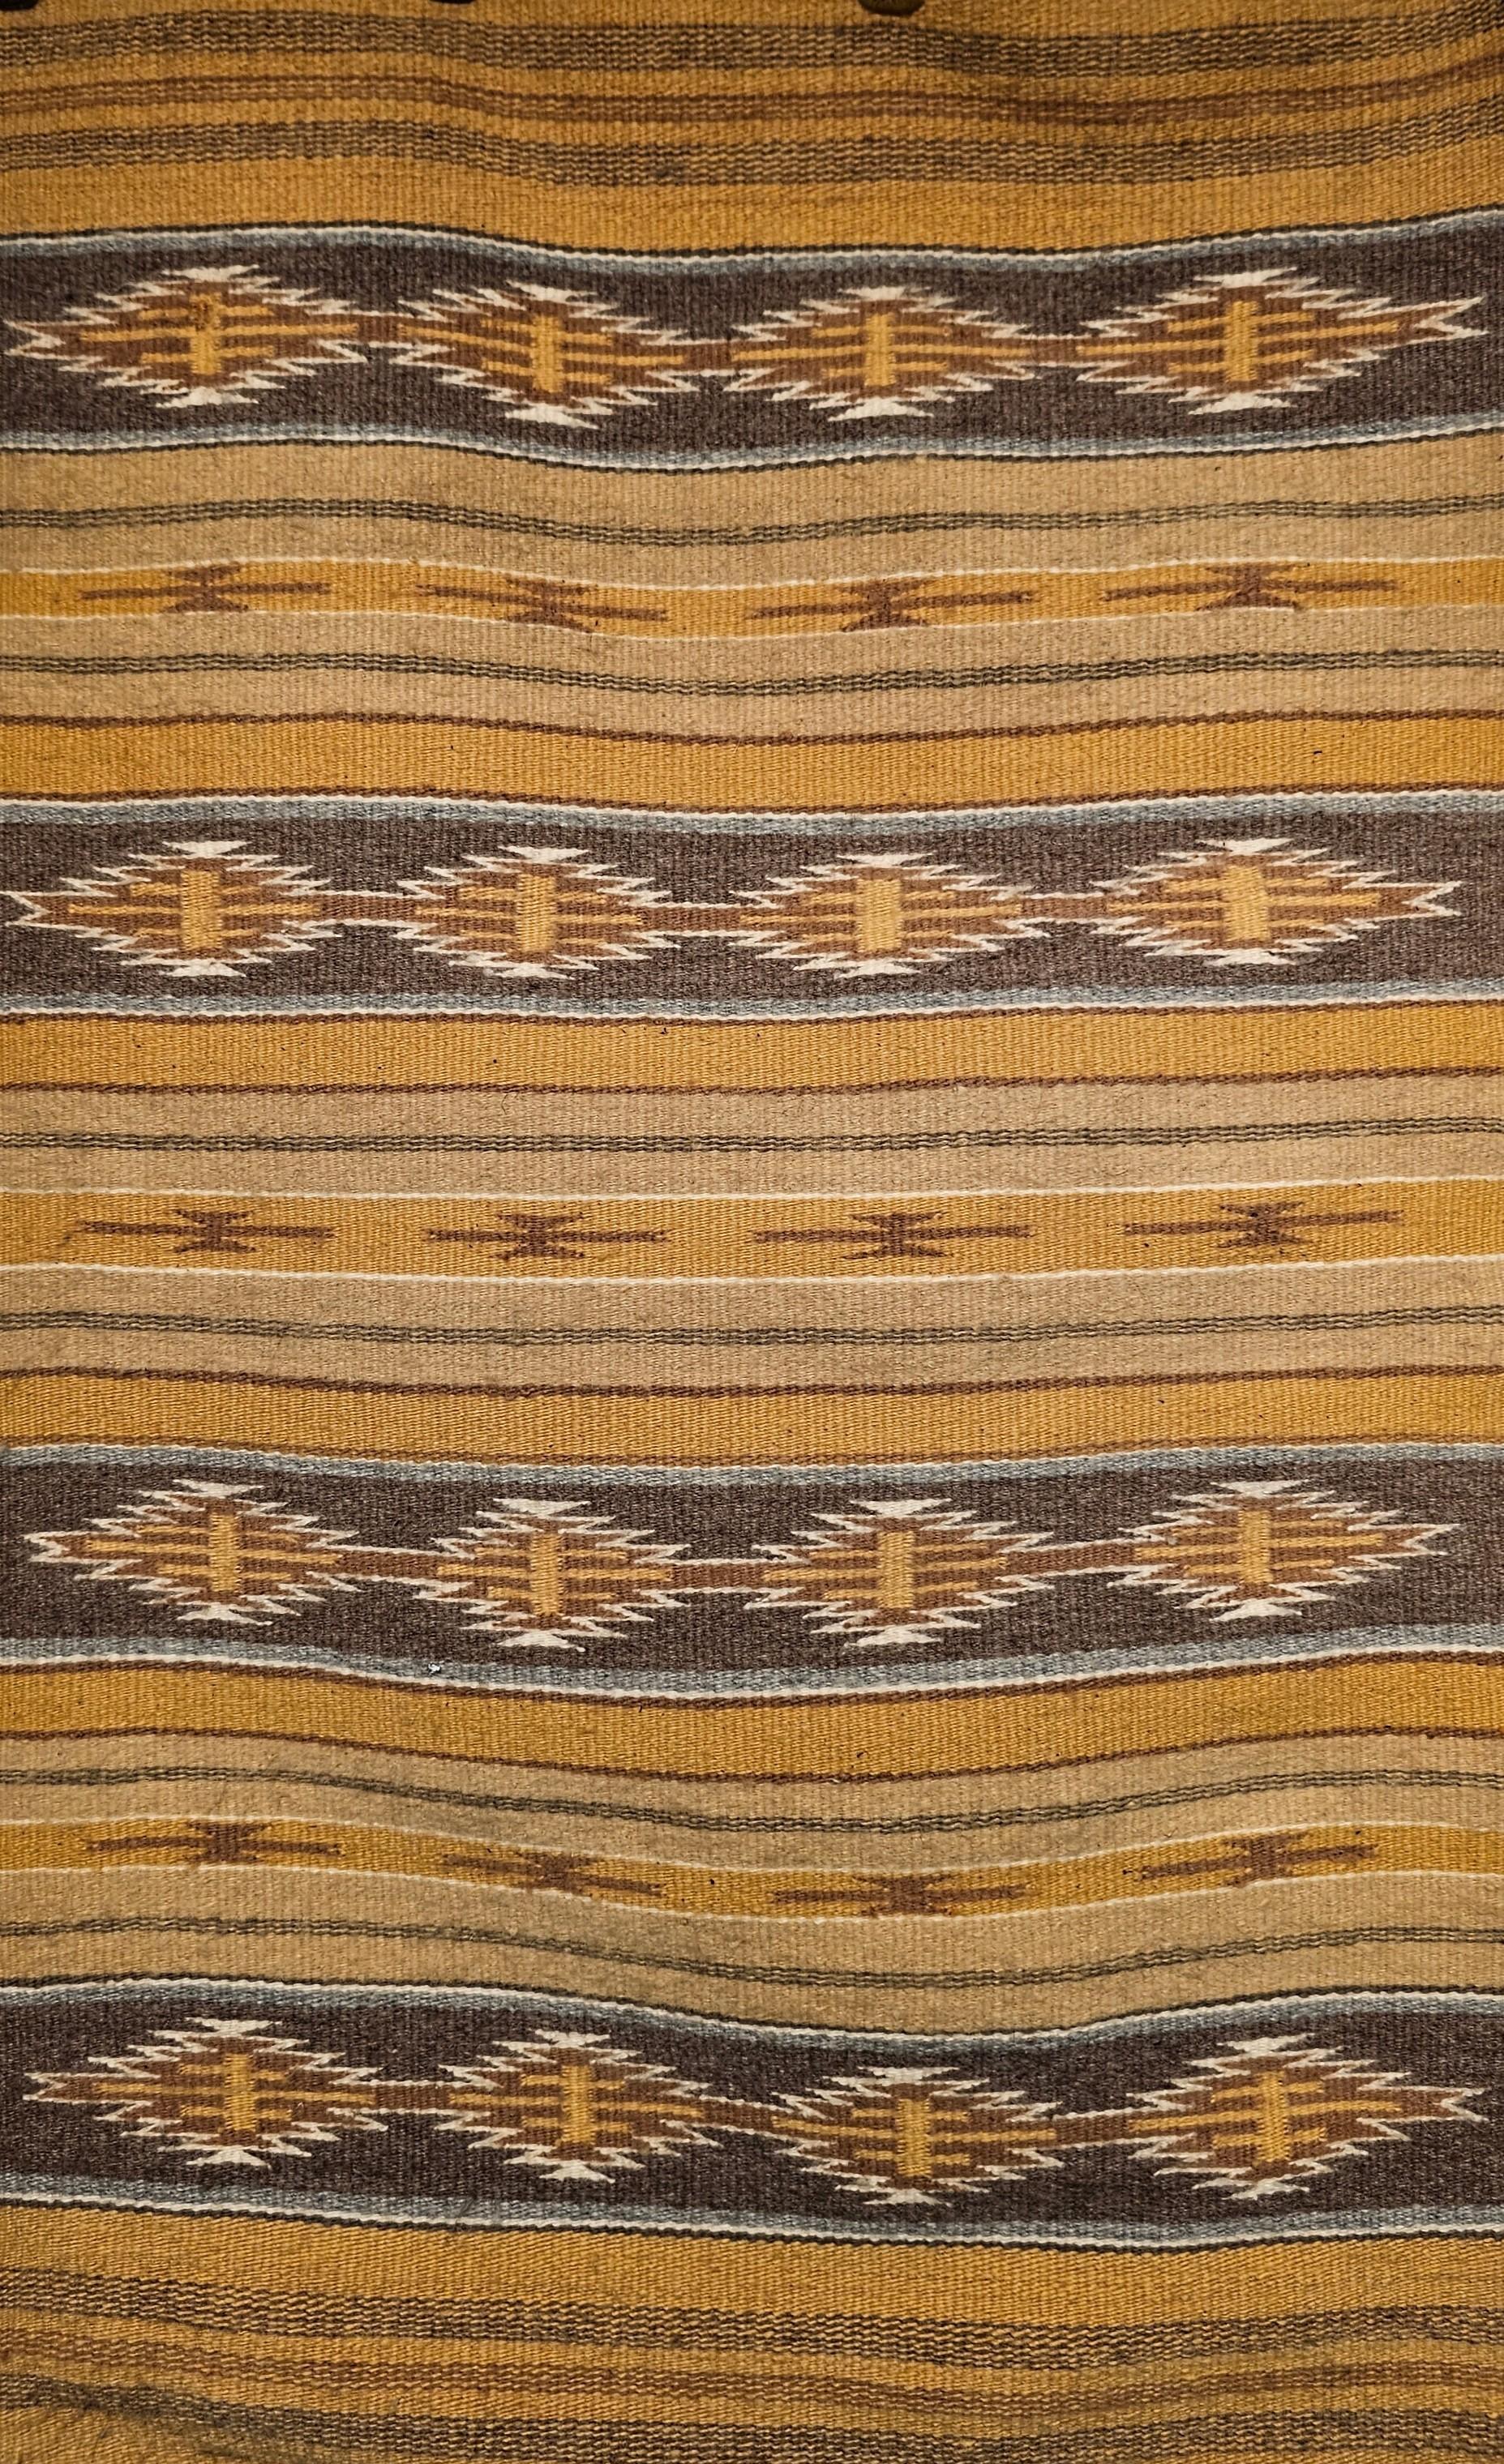 Vintage Navajo rug in a banded and stripe pattern with natural earth tones including gray, ivory, black, and caramel from the 3rd quarter of the 1900s.    The rug contains major bands with star geometric design set in a dark gray background